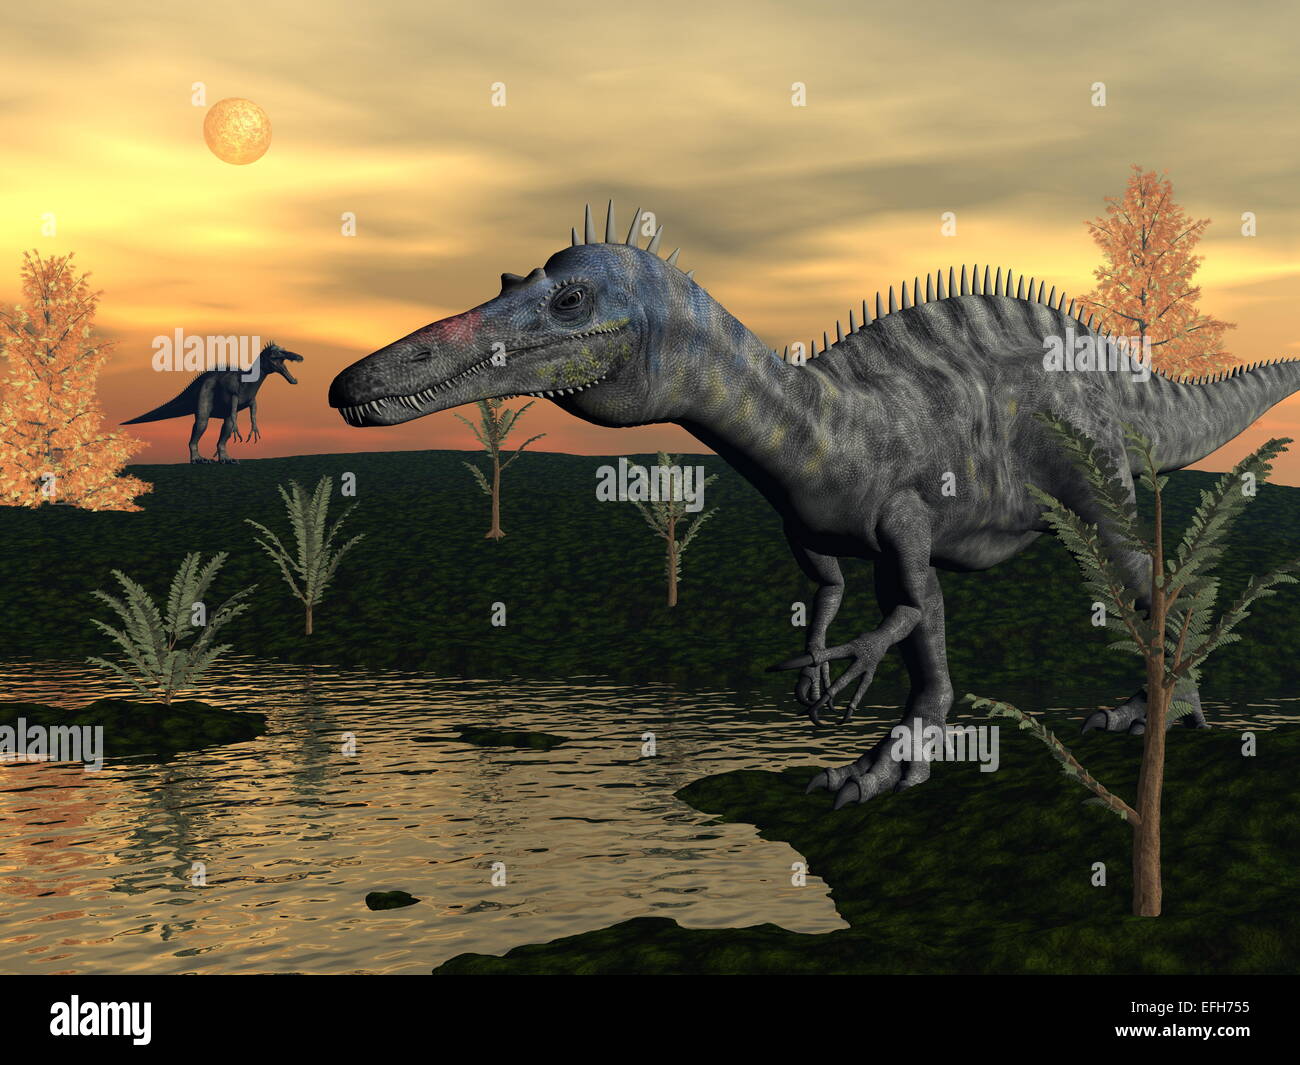 Suchomimus dinosaurs walking next to pond, pachypteris and bald cypres trees by sunset - 3D render Stock Photo